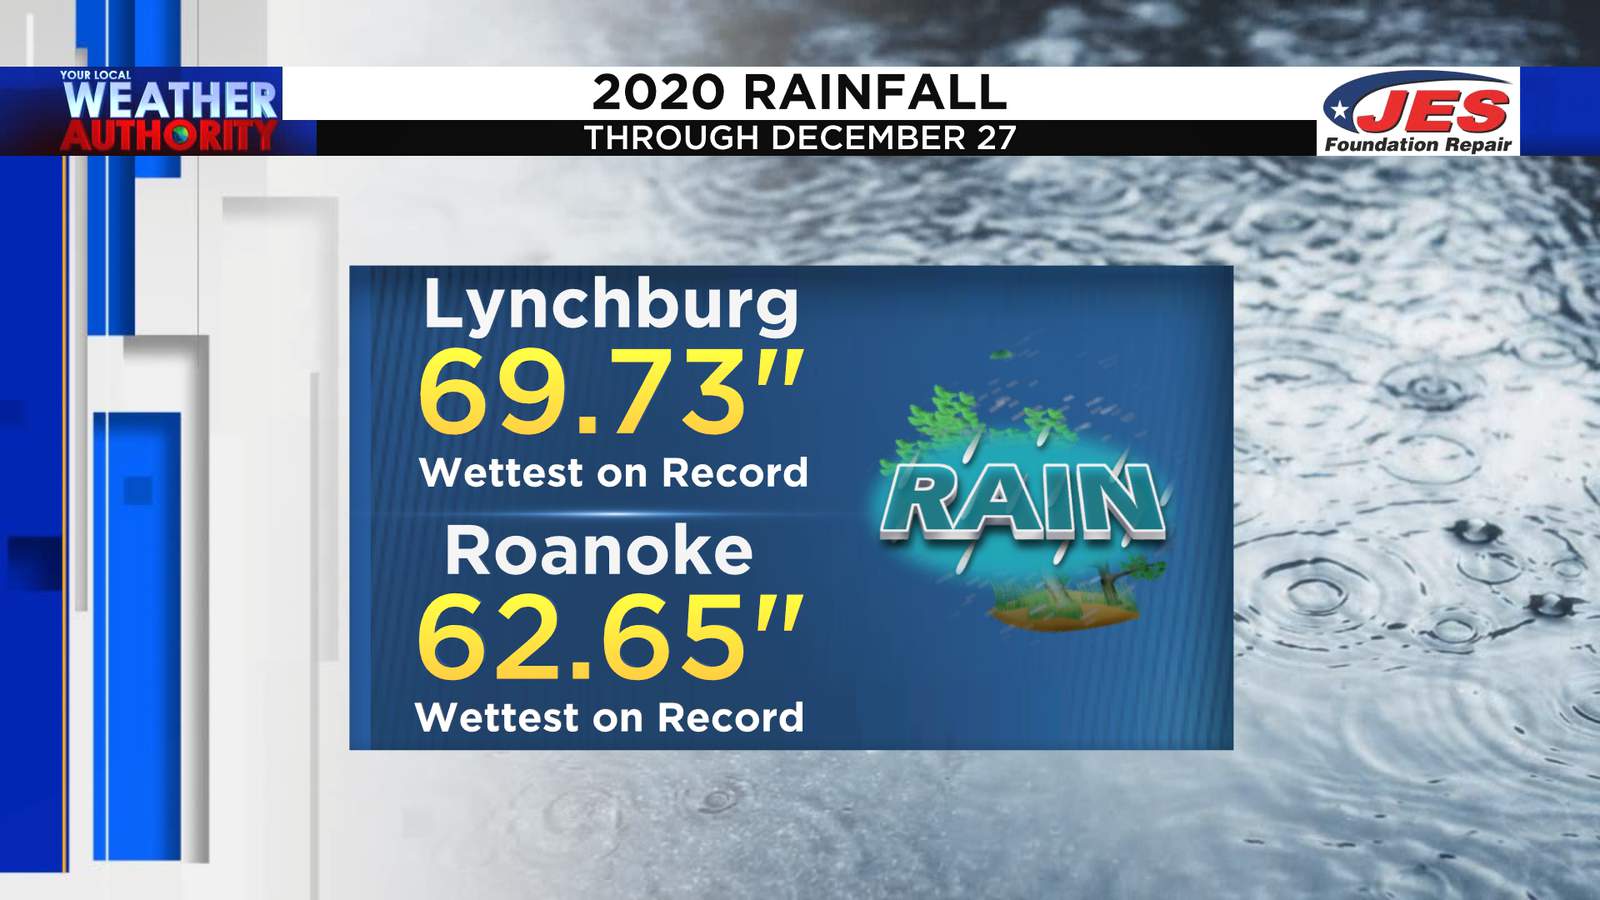 Beyond The Forecast: 2020 was the wettest year on record in Lynchburg and Roanoke